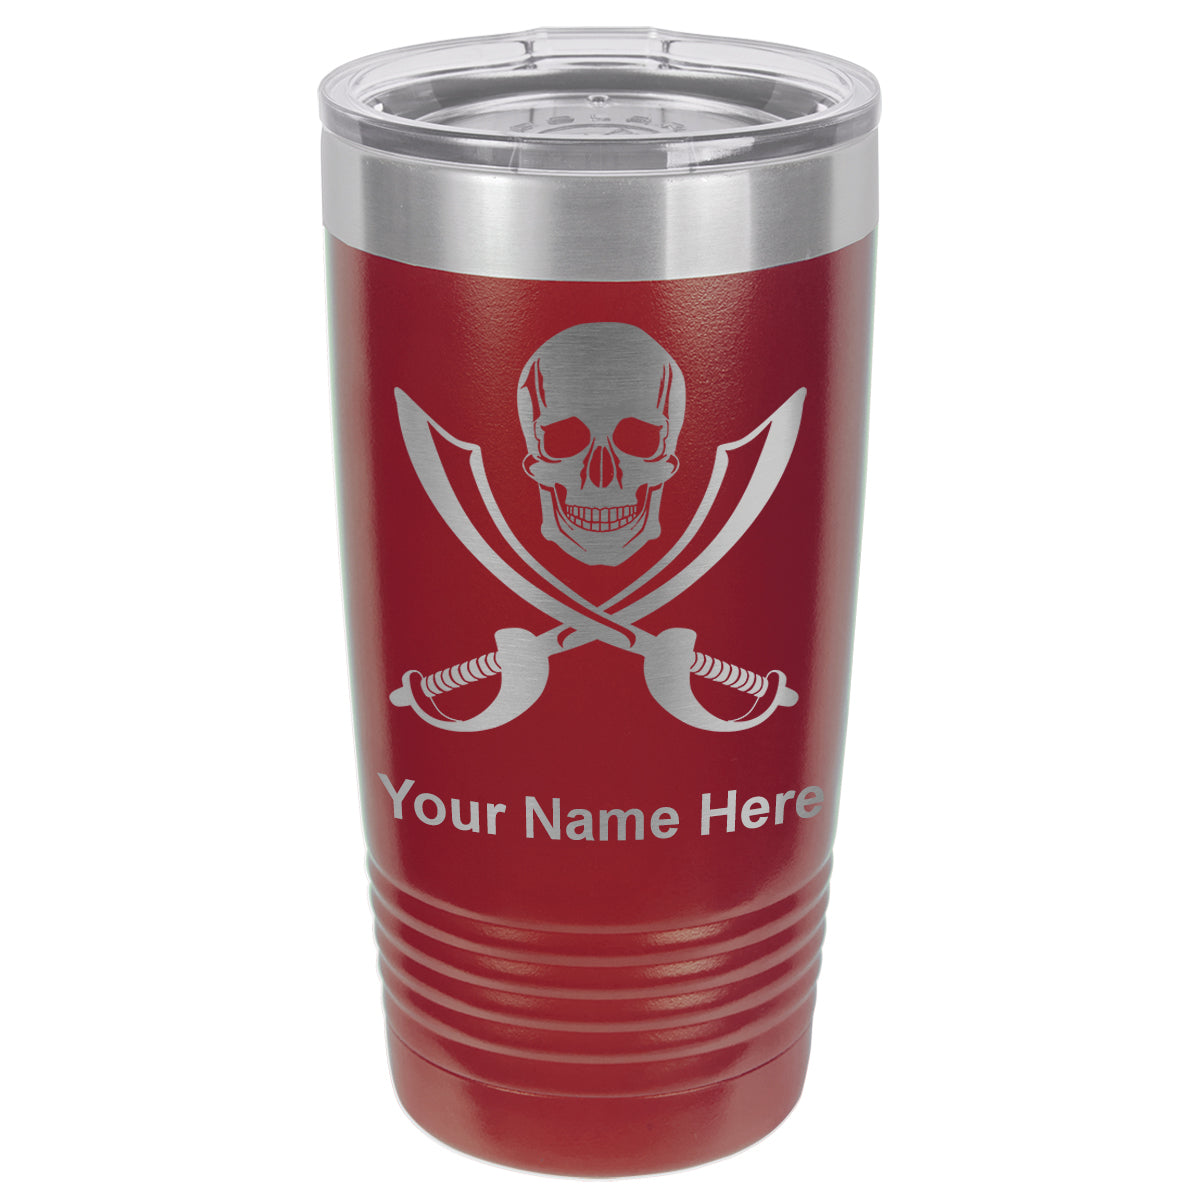 20oz Vacuum Insulated Tumbler Mug, Jolly Roger, Personalized Engraving Included